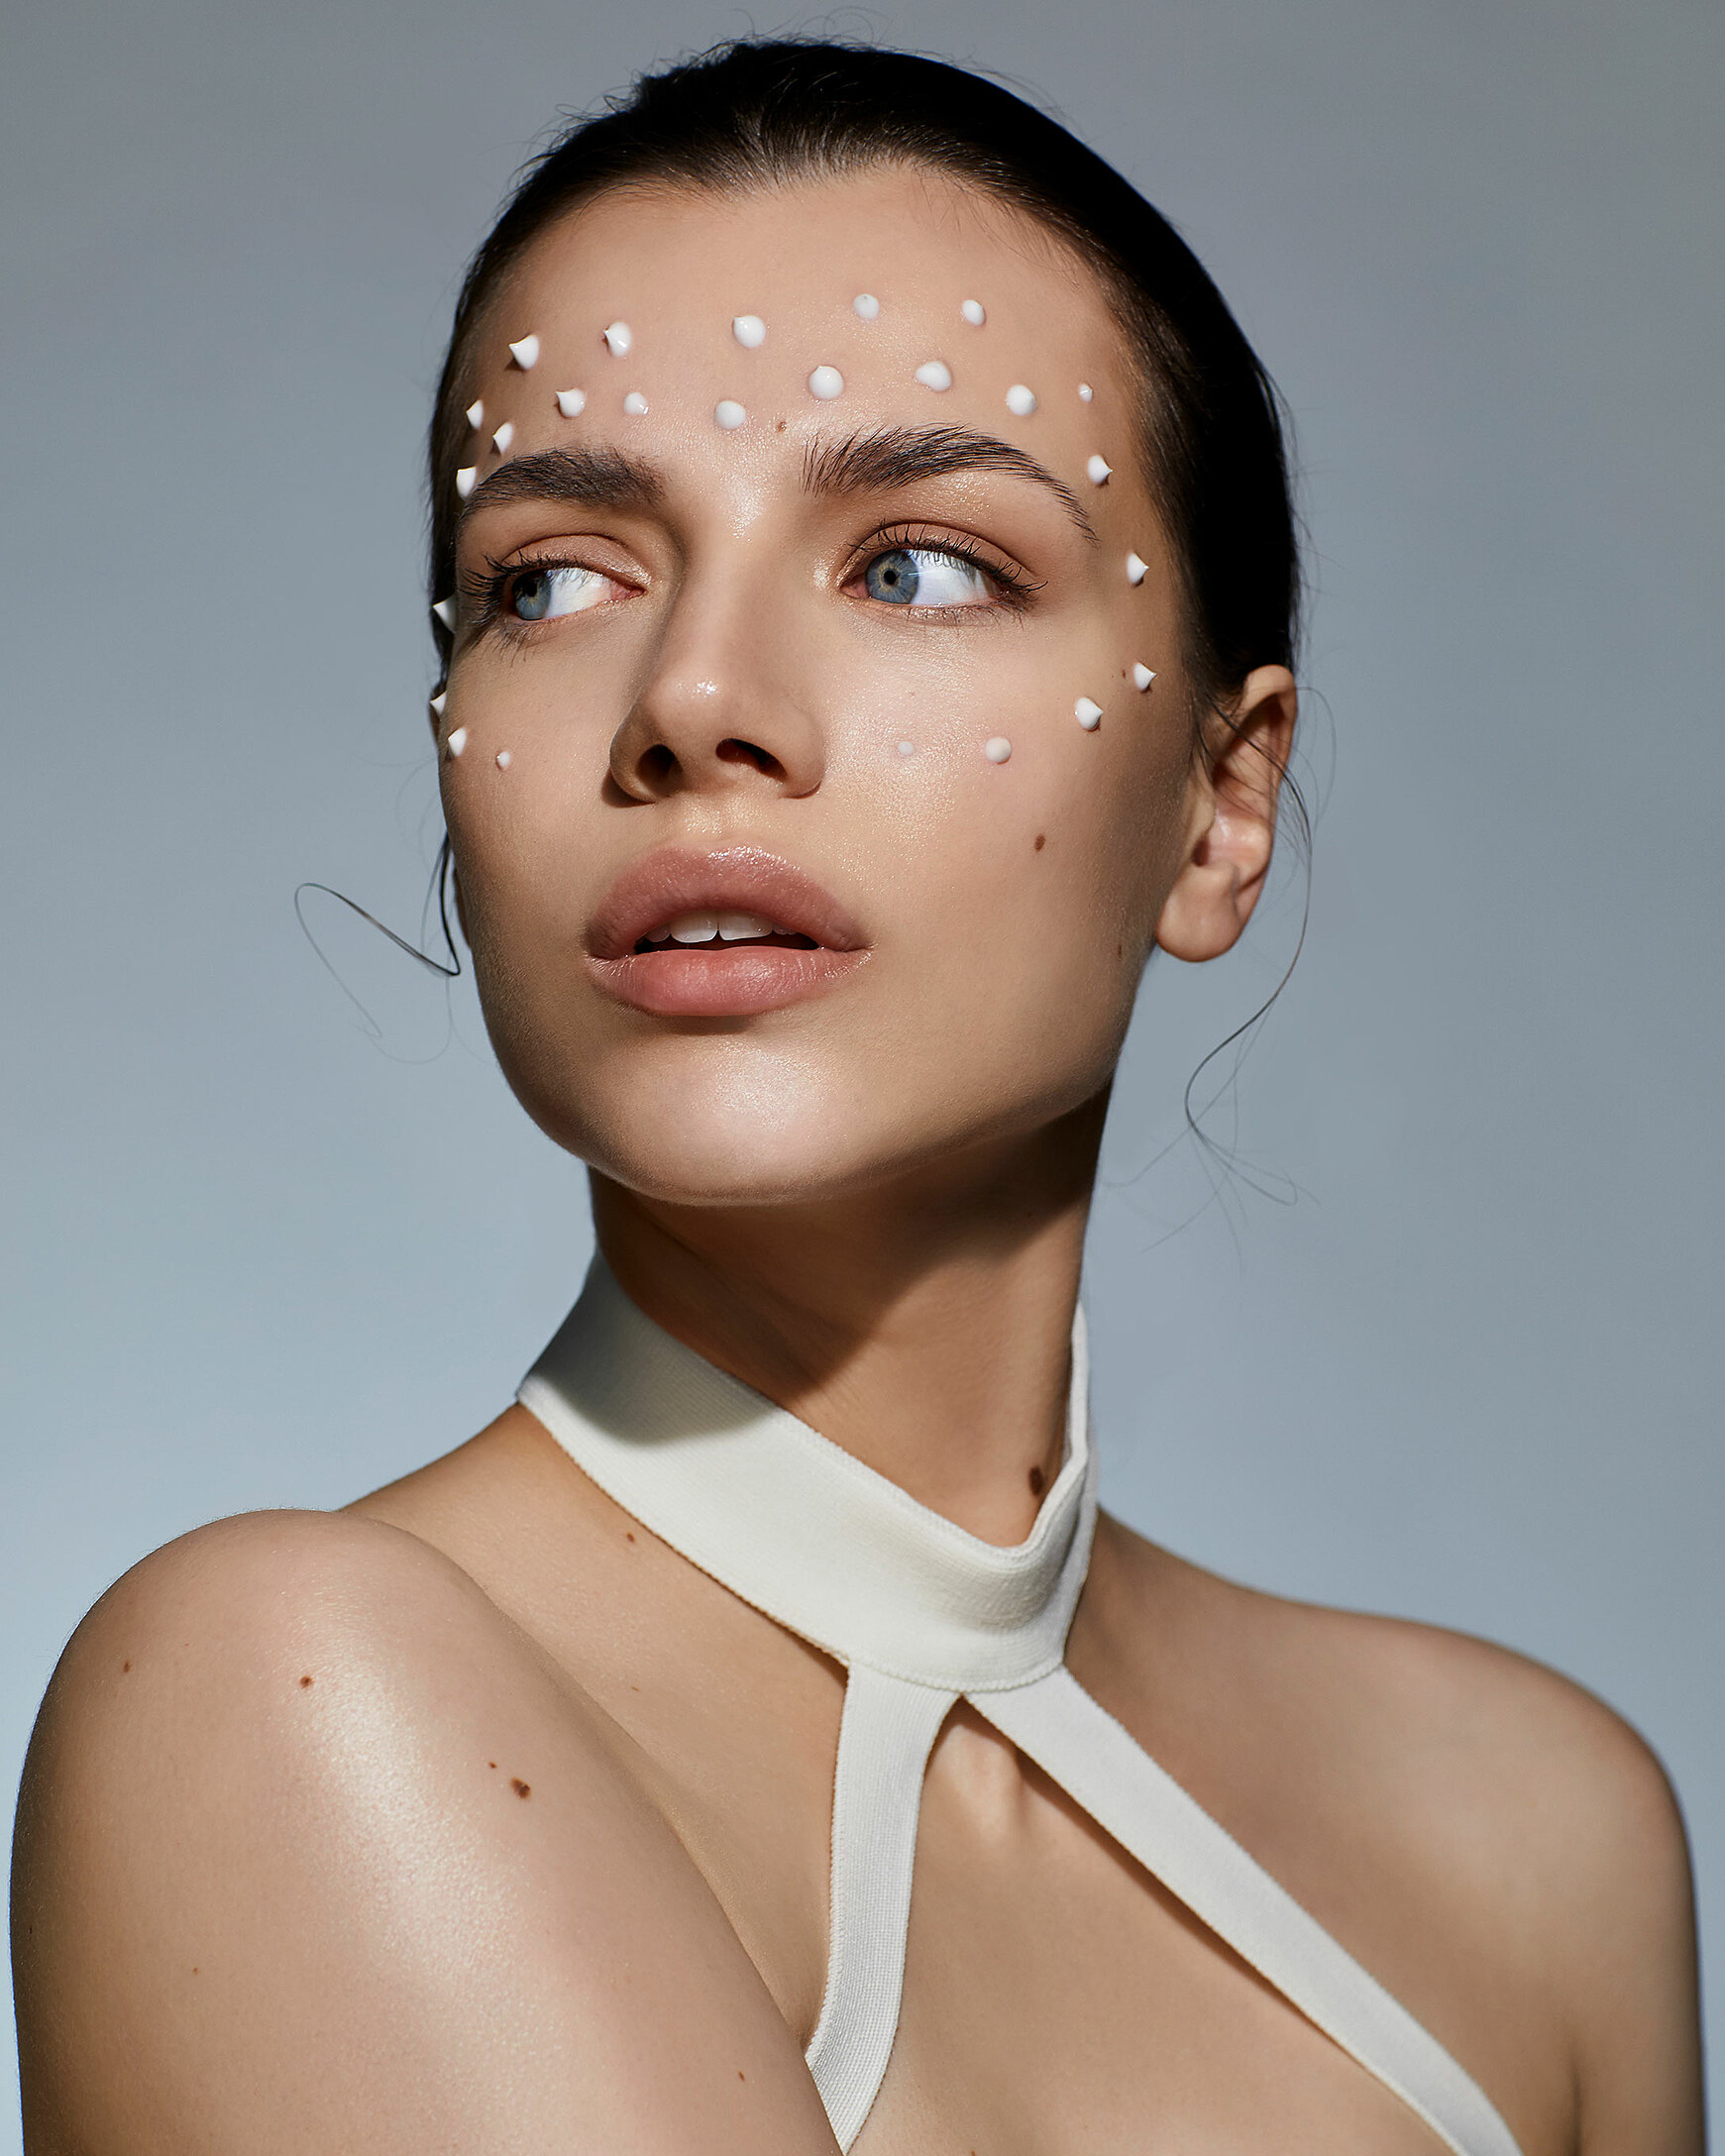 A beauty photography of a female model with dark hair. She has cream dots around her eyes